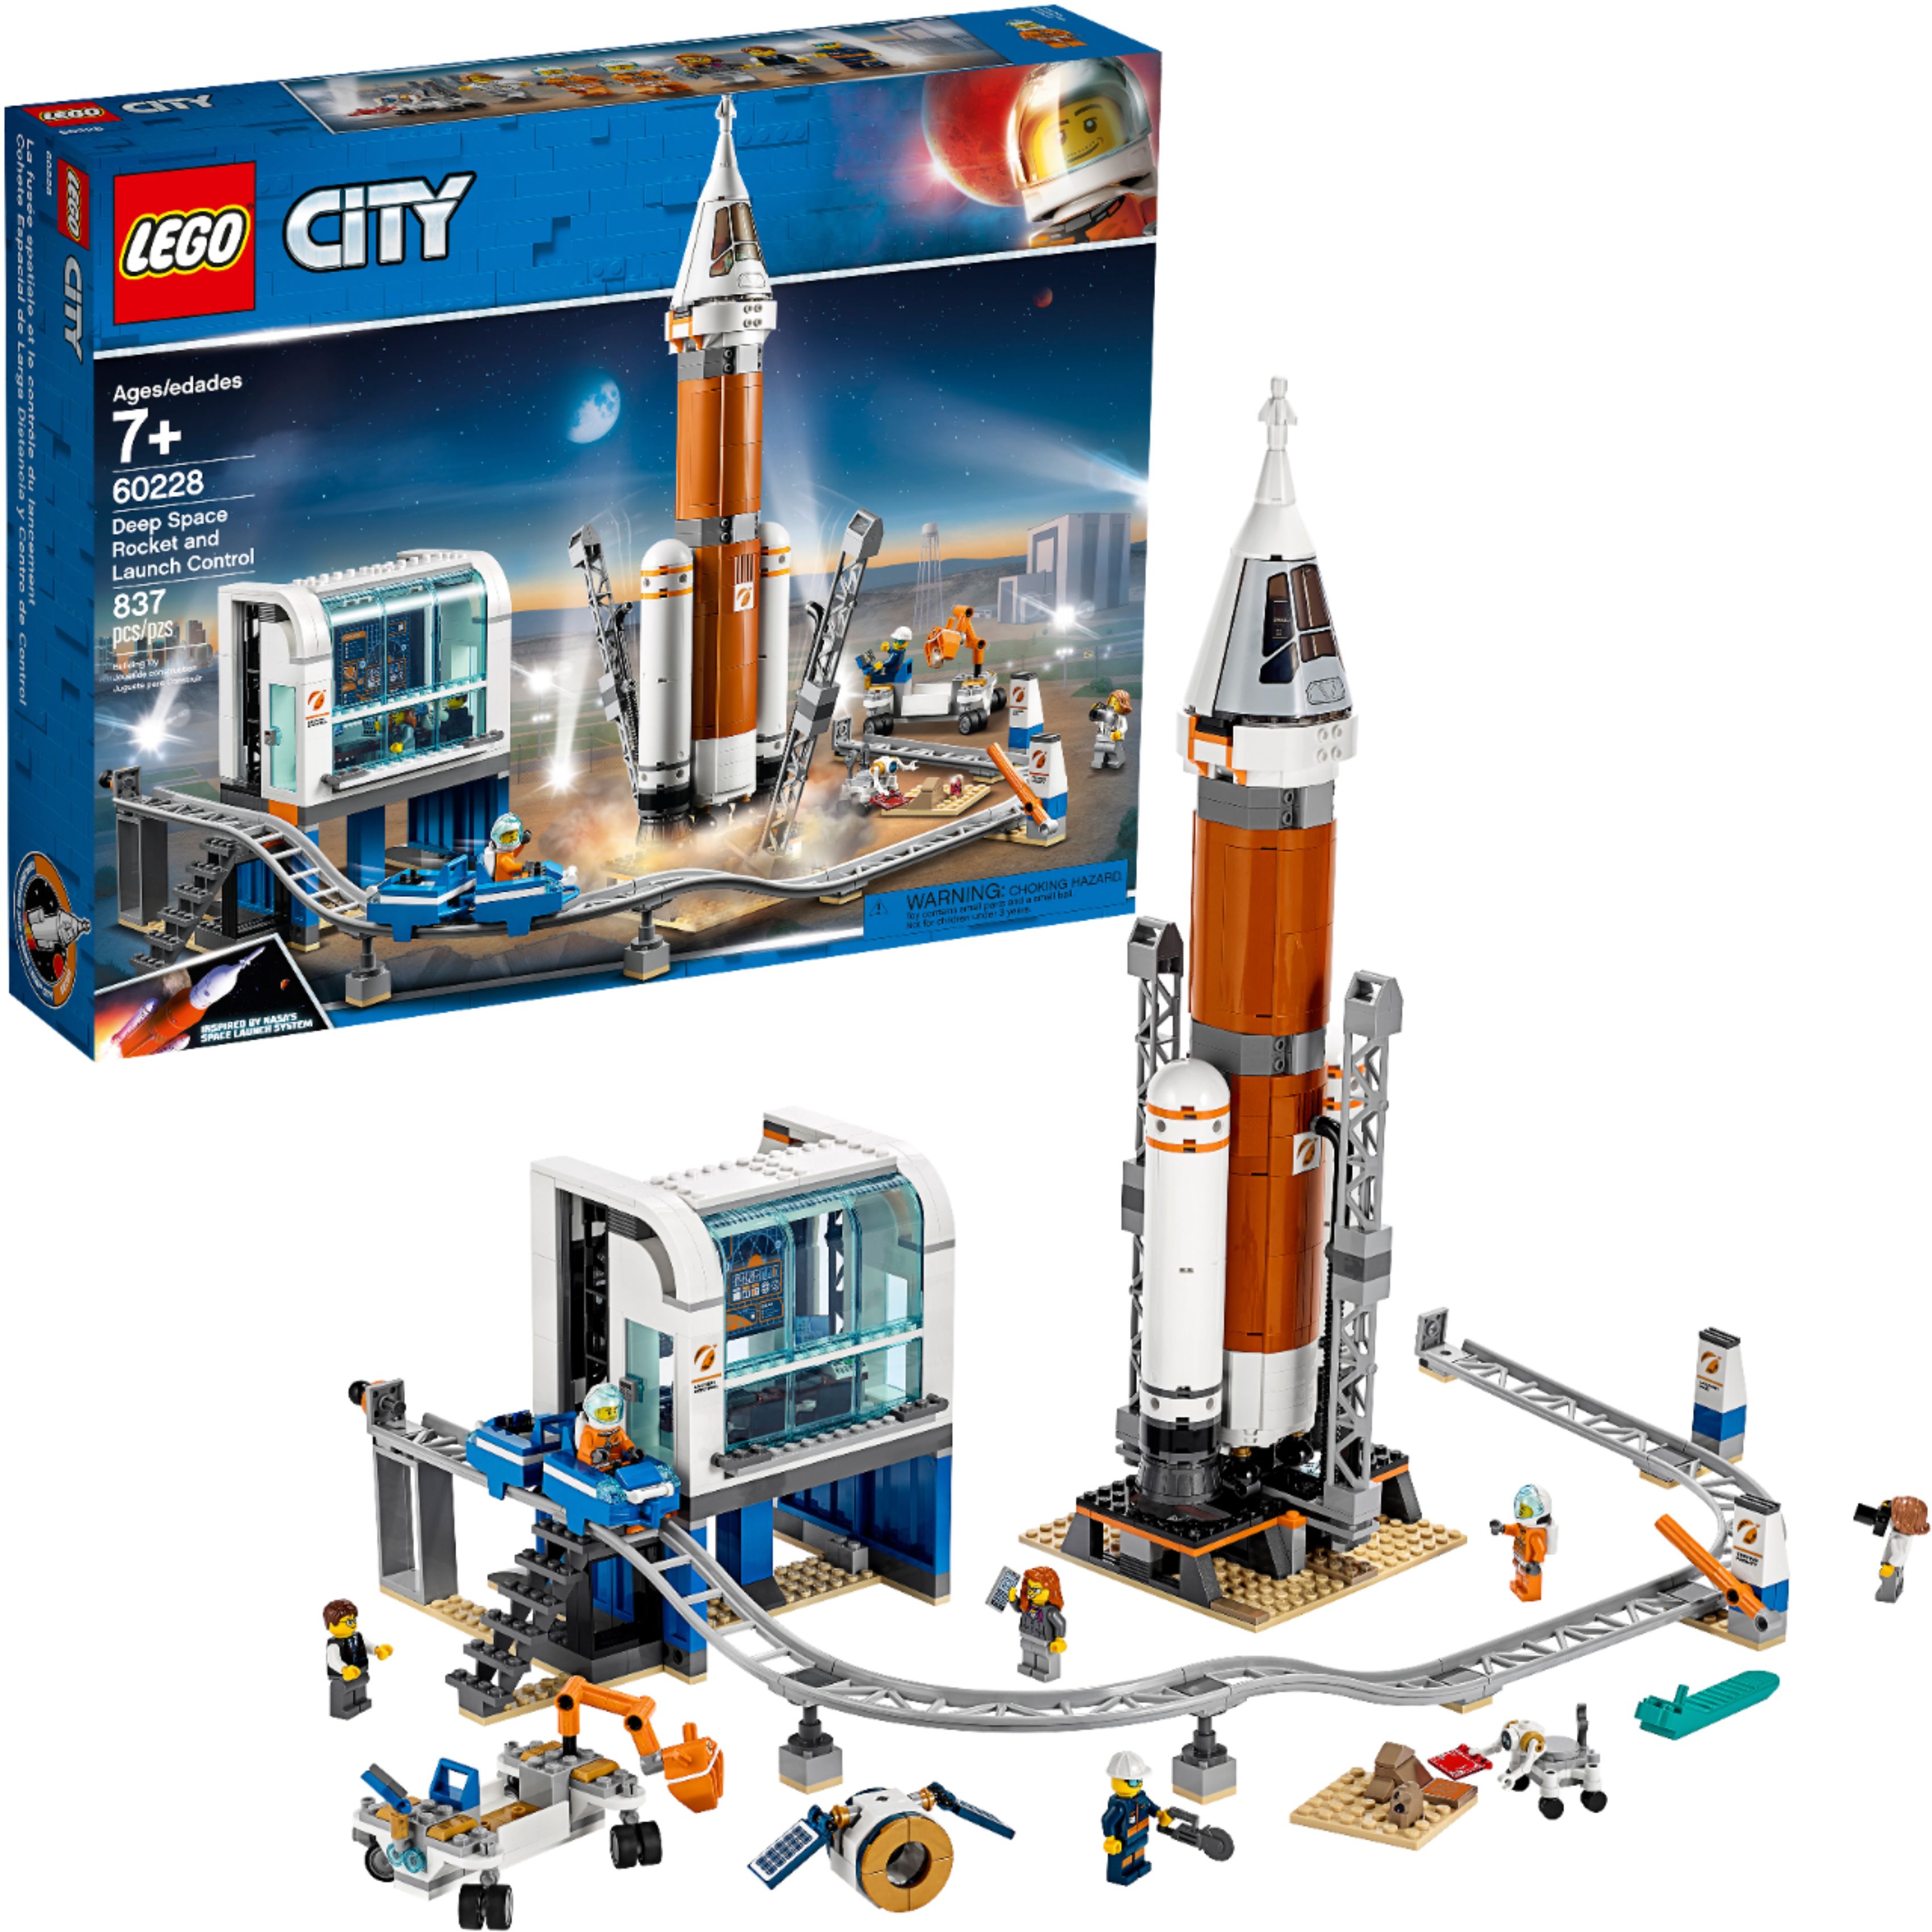 Best Buy: LEGO City Deep Space Rocket and Launch Control 60228 6251727